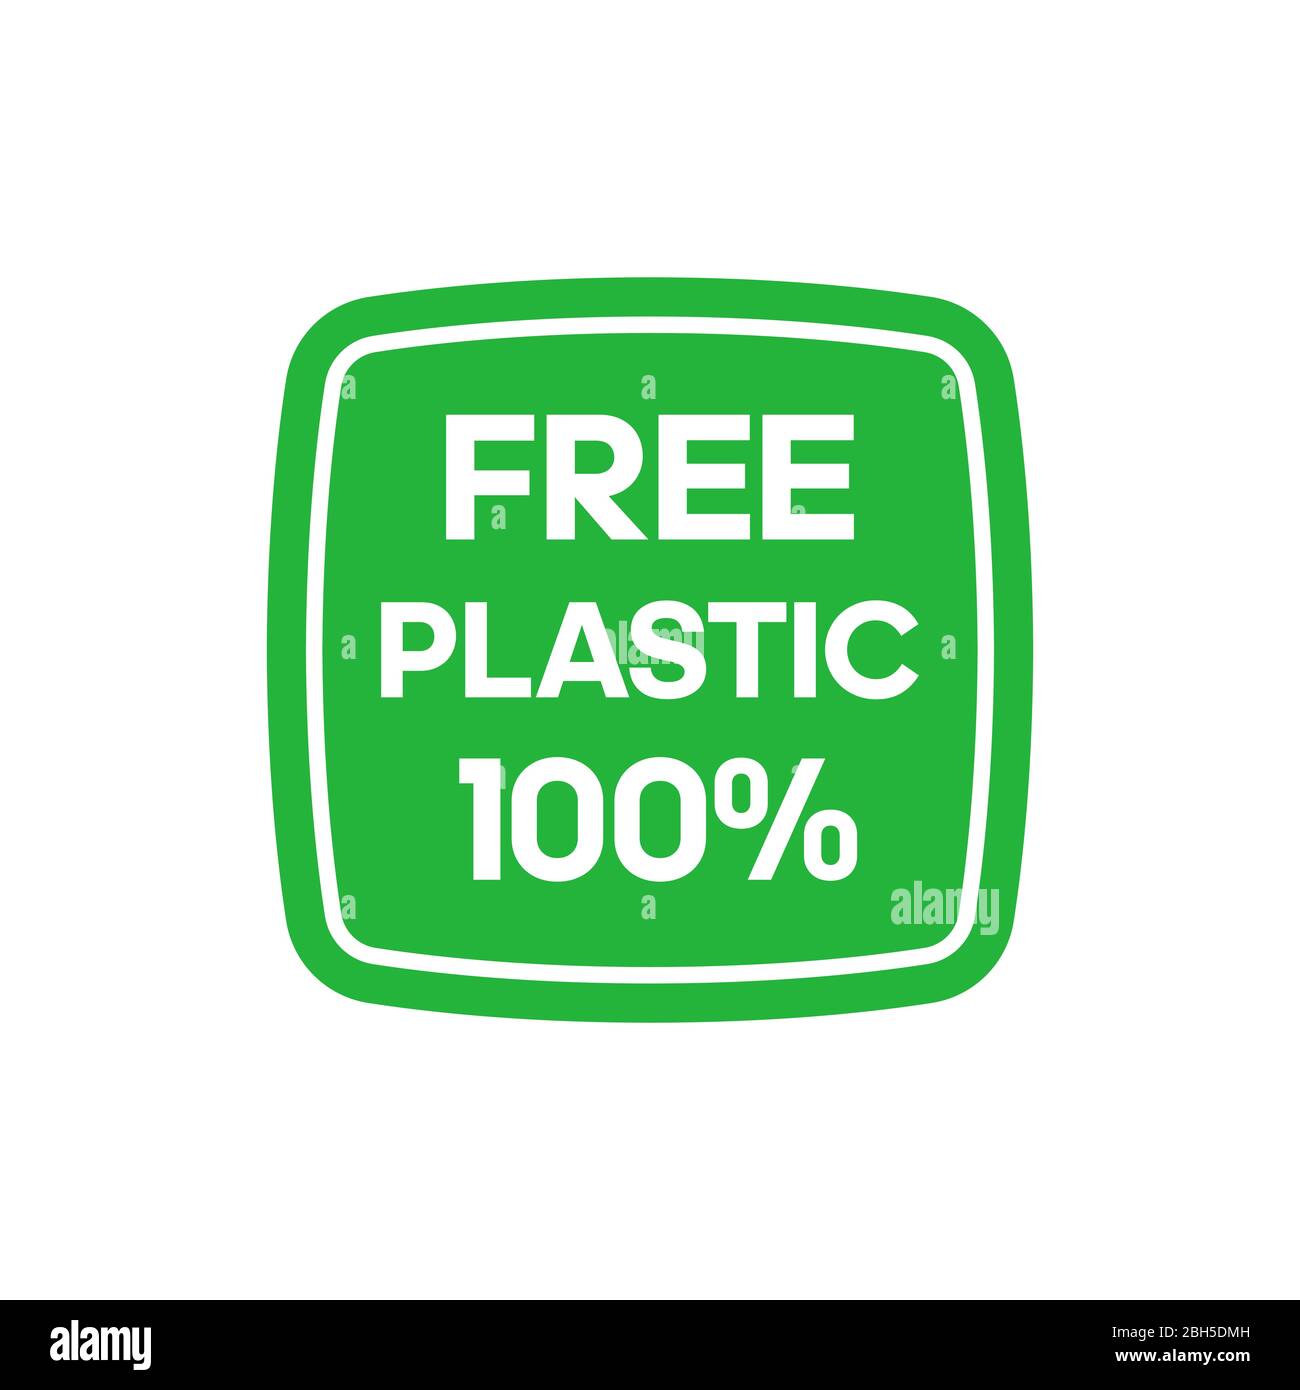 Free plastic 100 percent green rectangle sticker with round corners. Vector illustration. Stock Vector